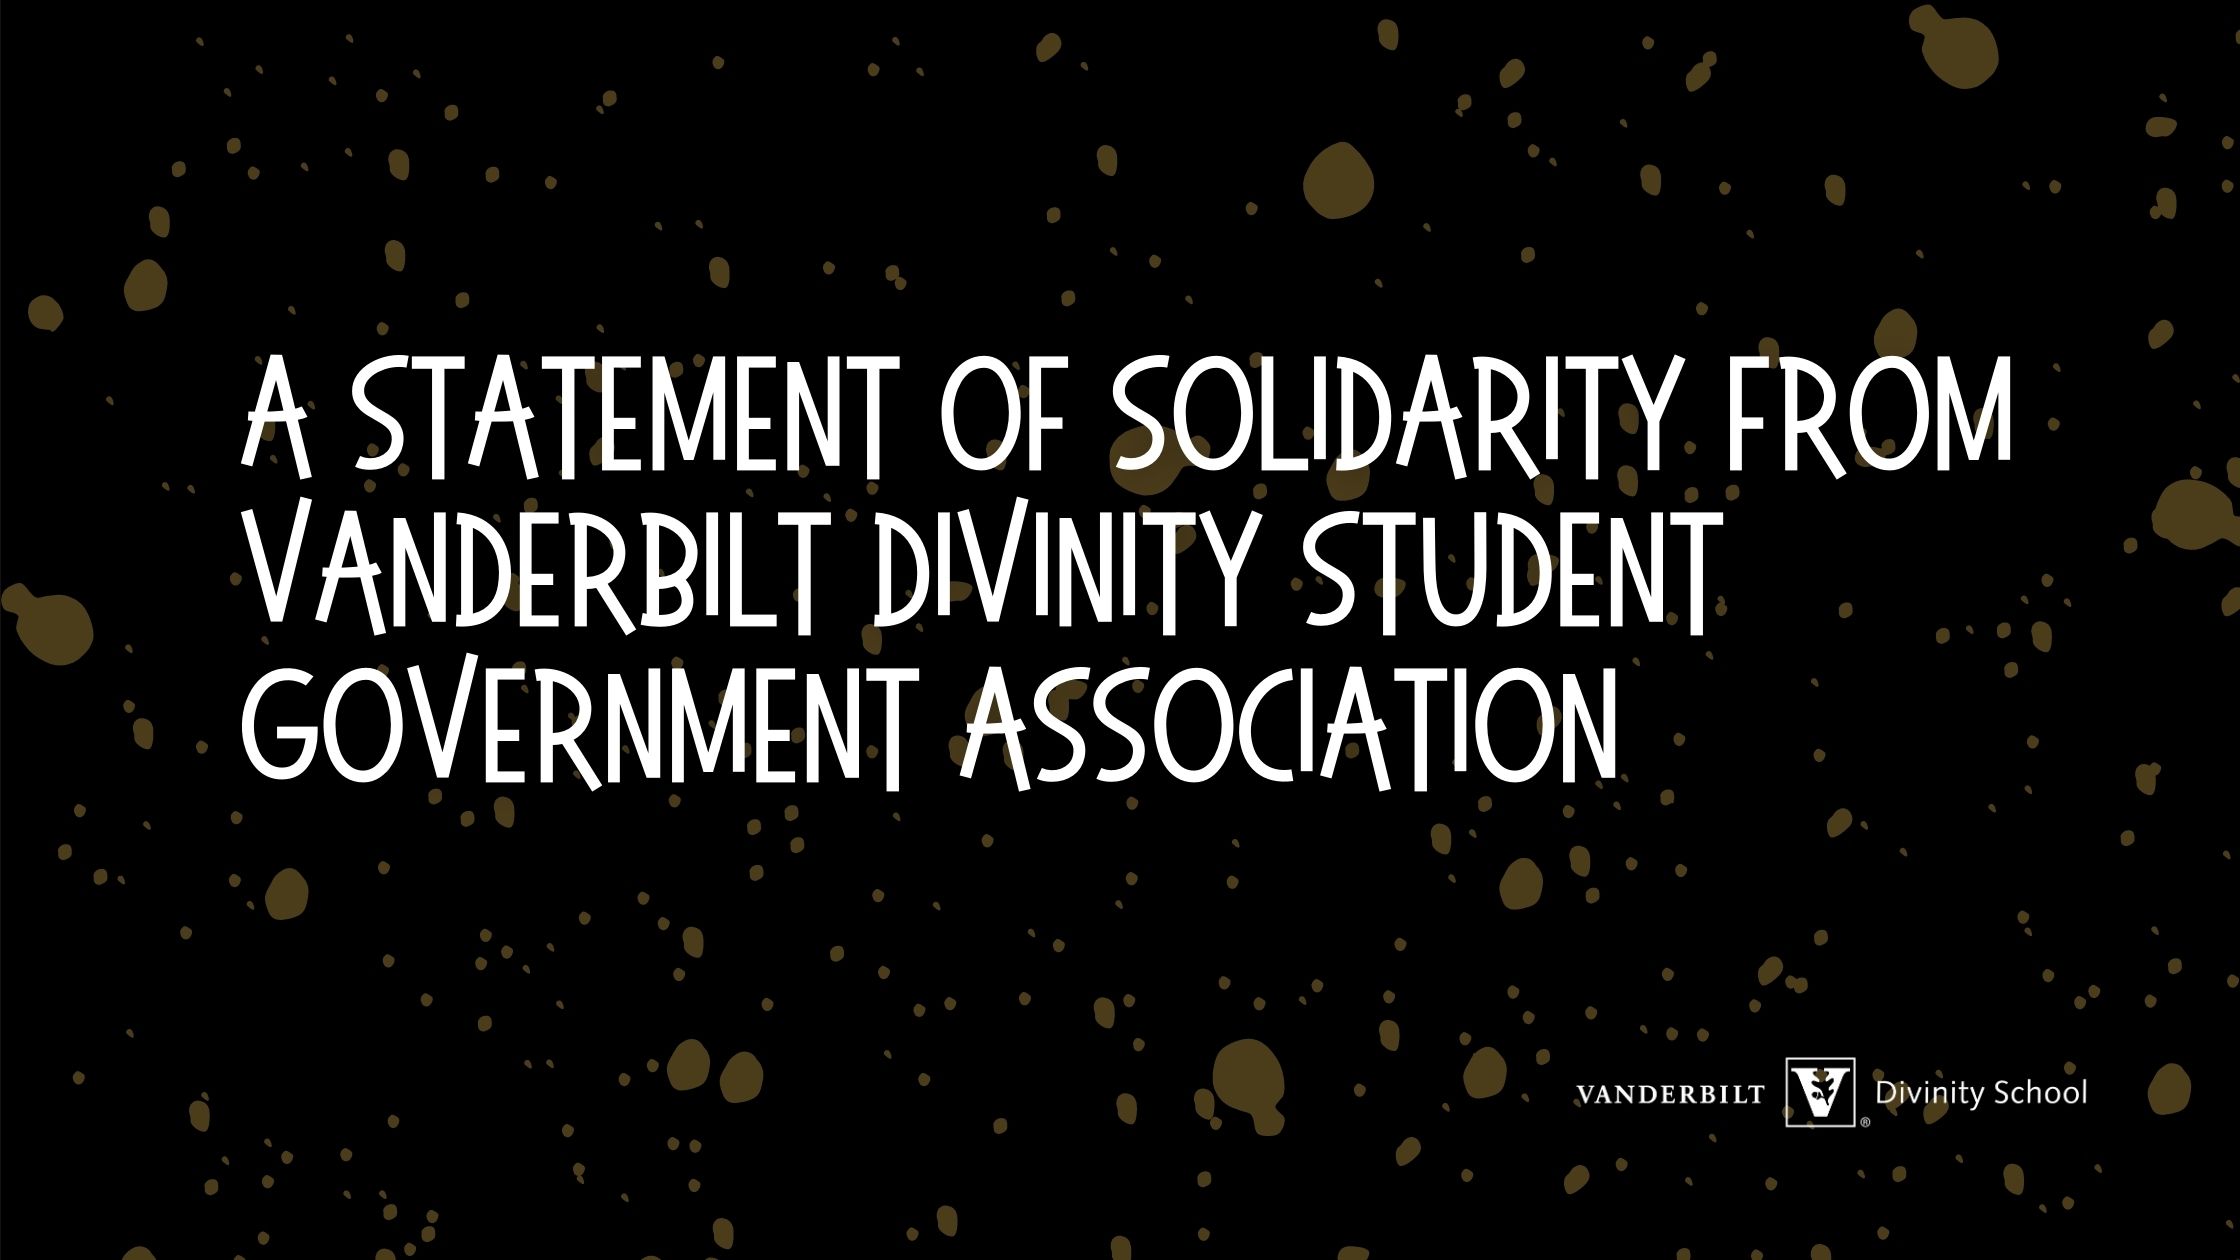 VDS Student Government solidarity statement